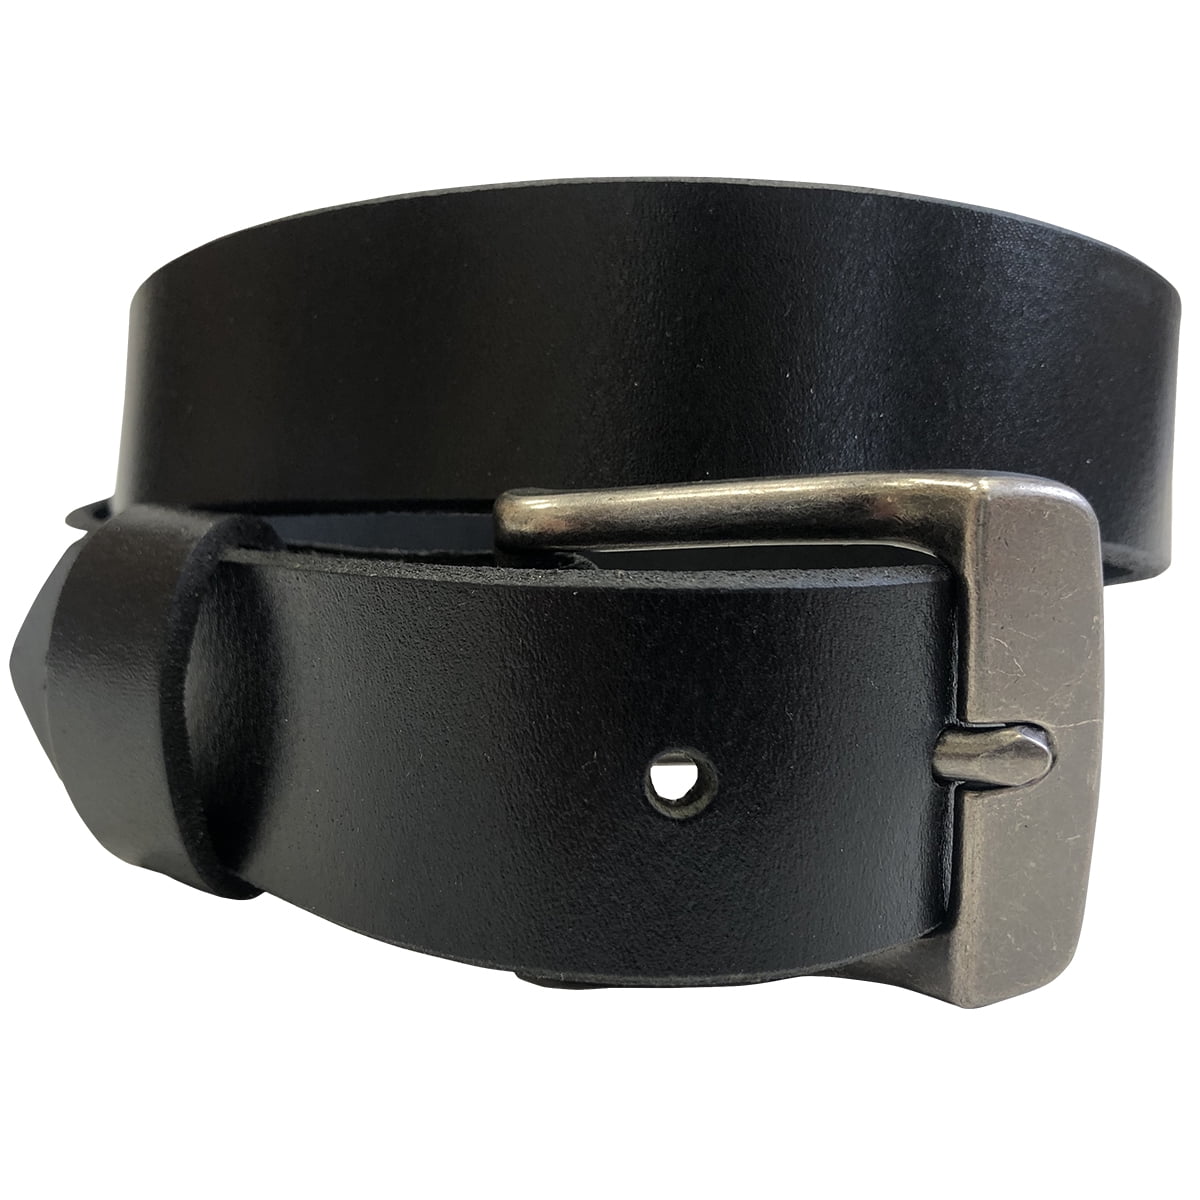 MENS REAL LEATHER  BELTS BLACK FULL GRAIN LEATHER SOFT  RRP.£24.99 34MM WIDE 